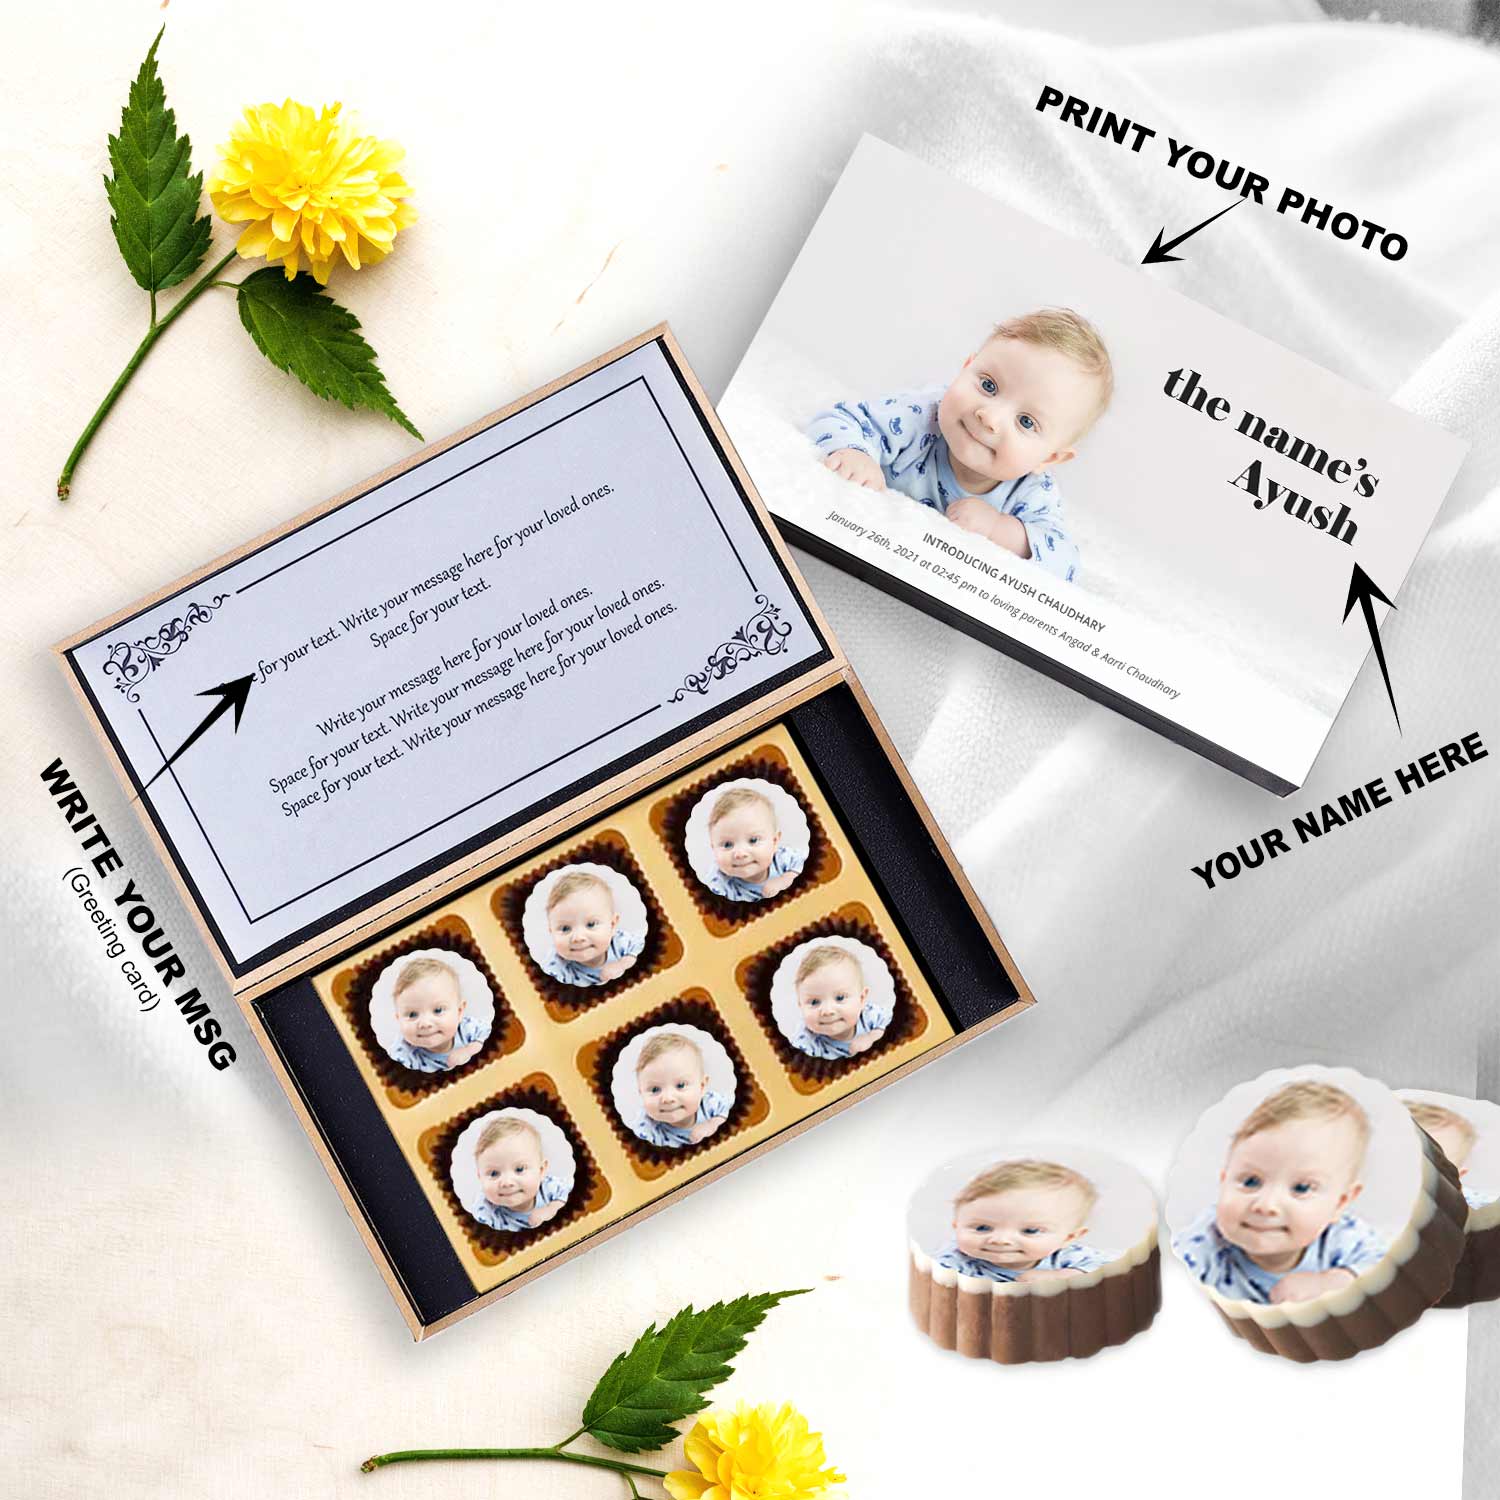 Unique way to announce baby - photo printed chocolates